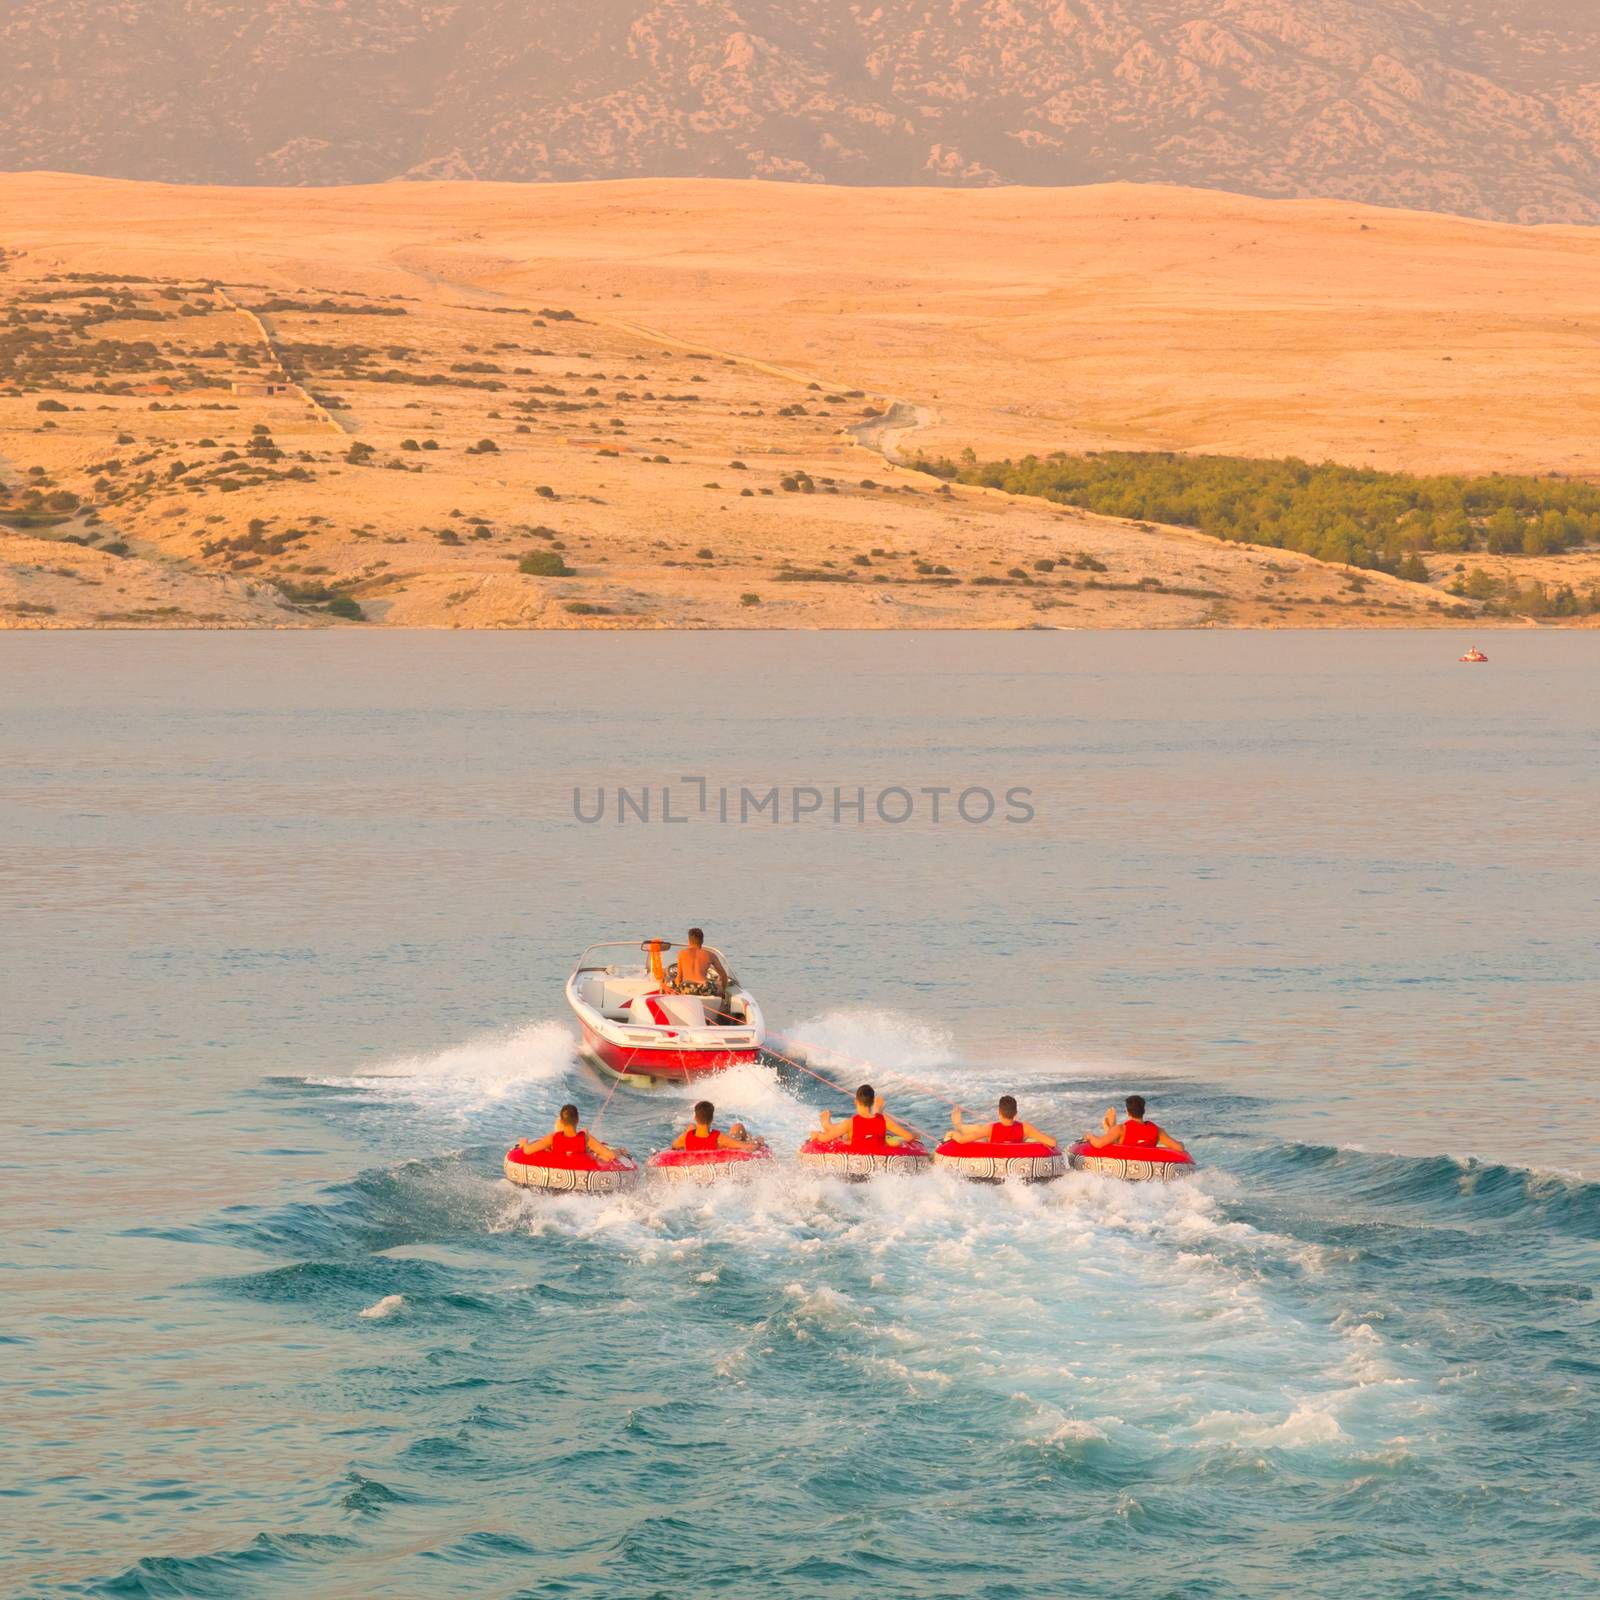 Kids tube riding tawed by speedboat on Croatian coast. Summer sea fun and adventure. Exciting water sport.